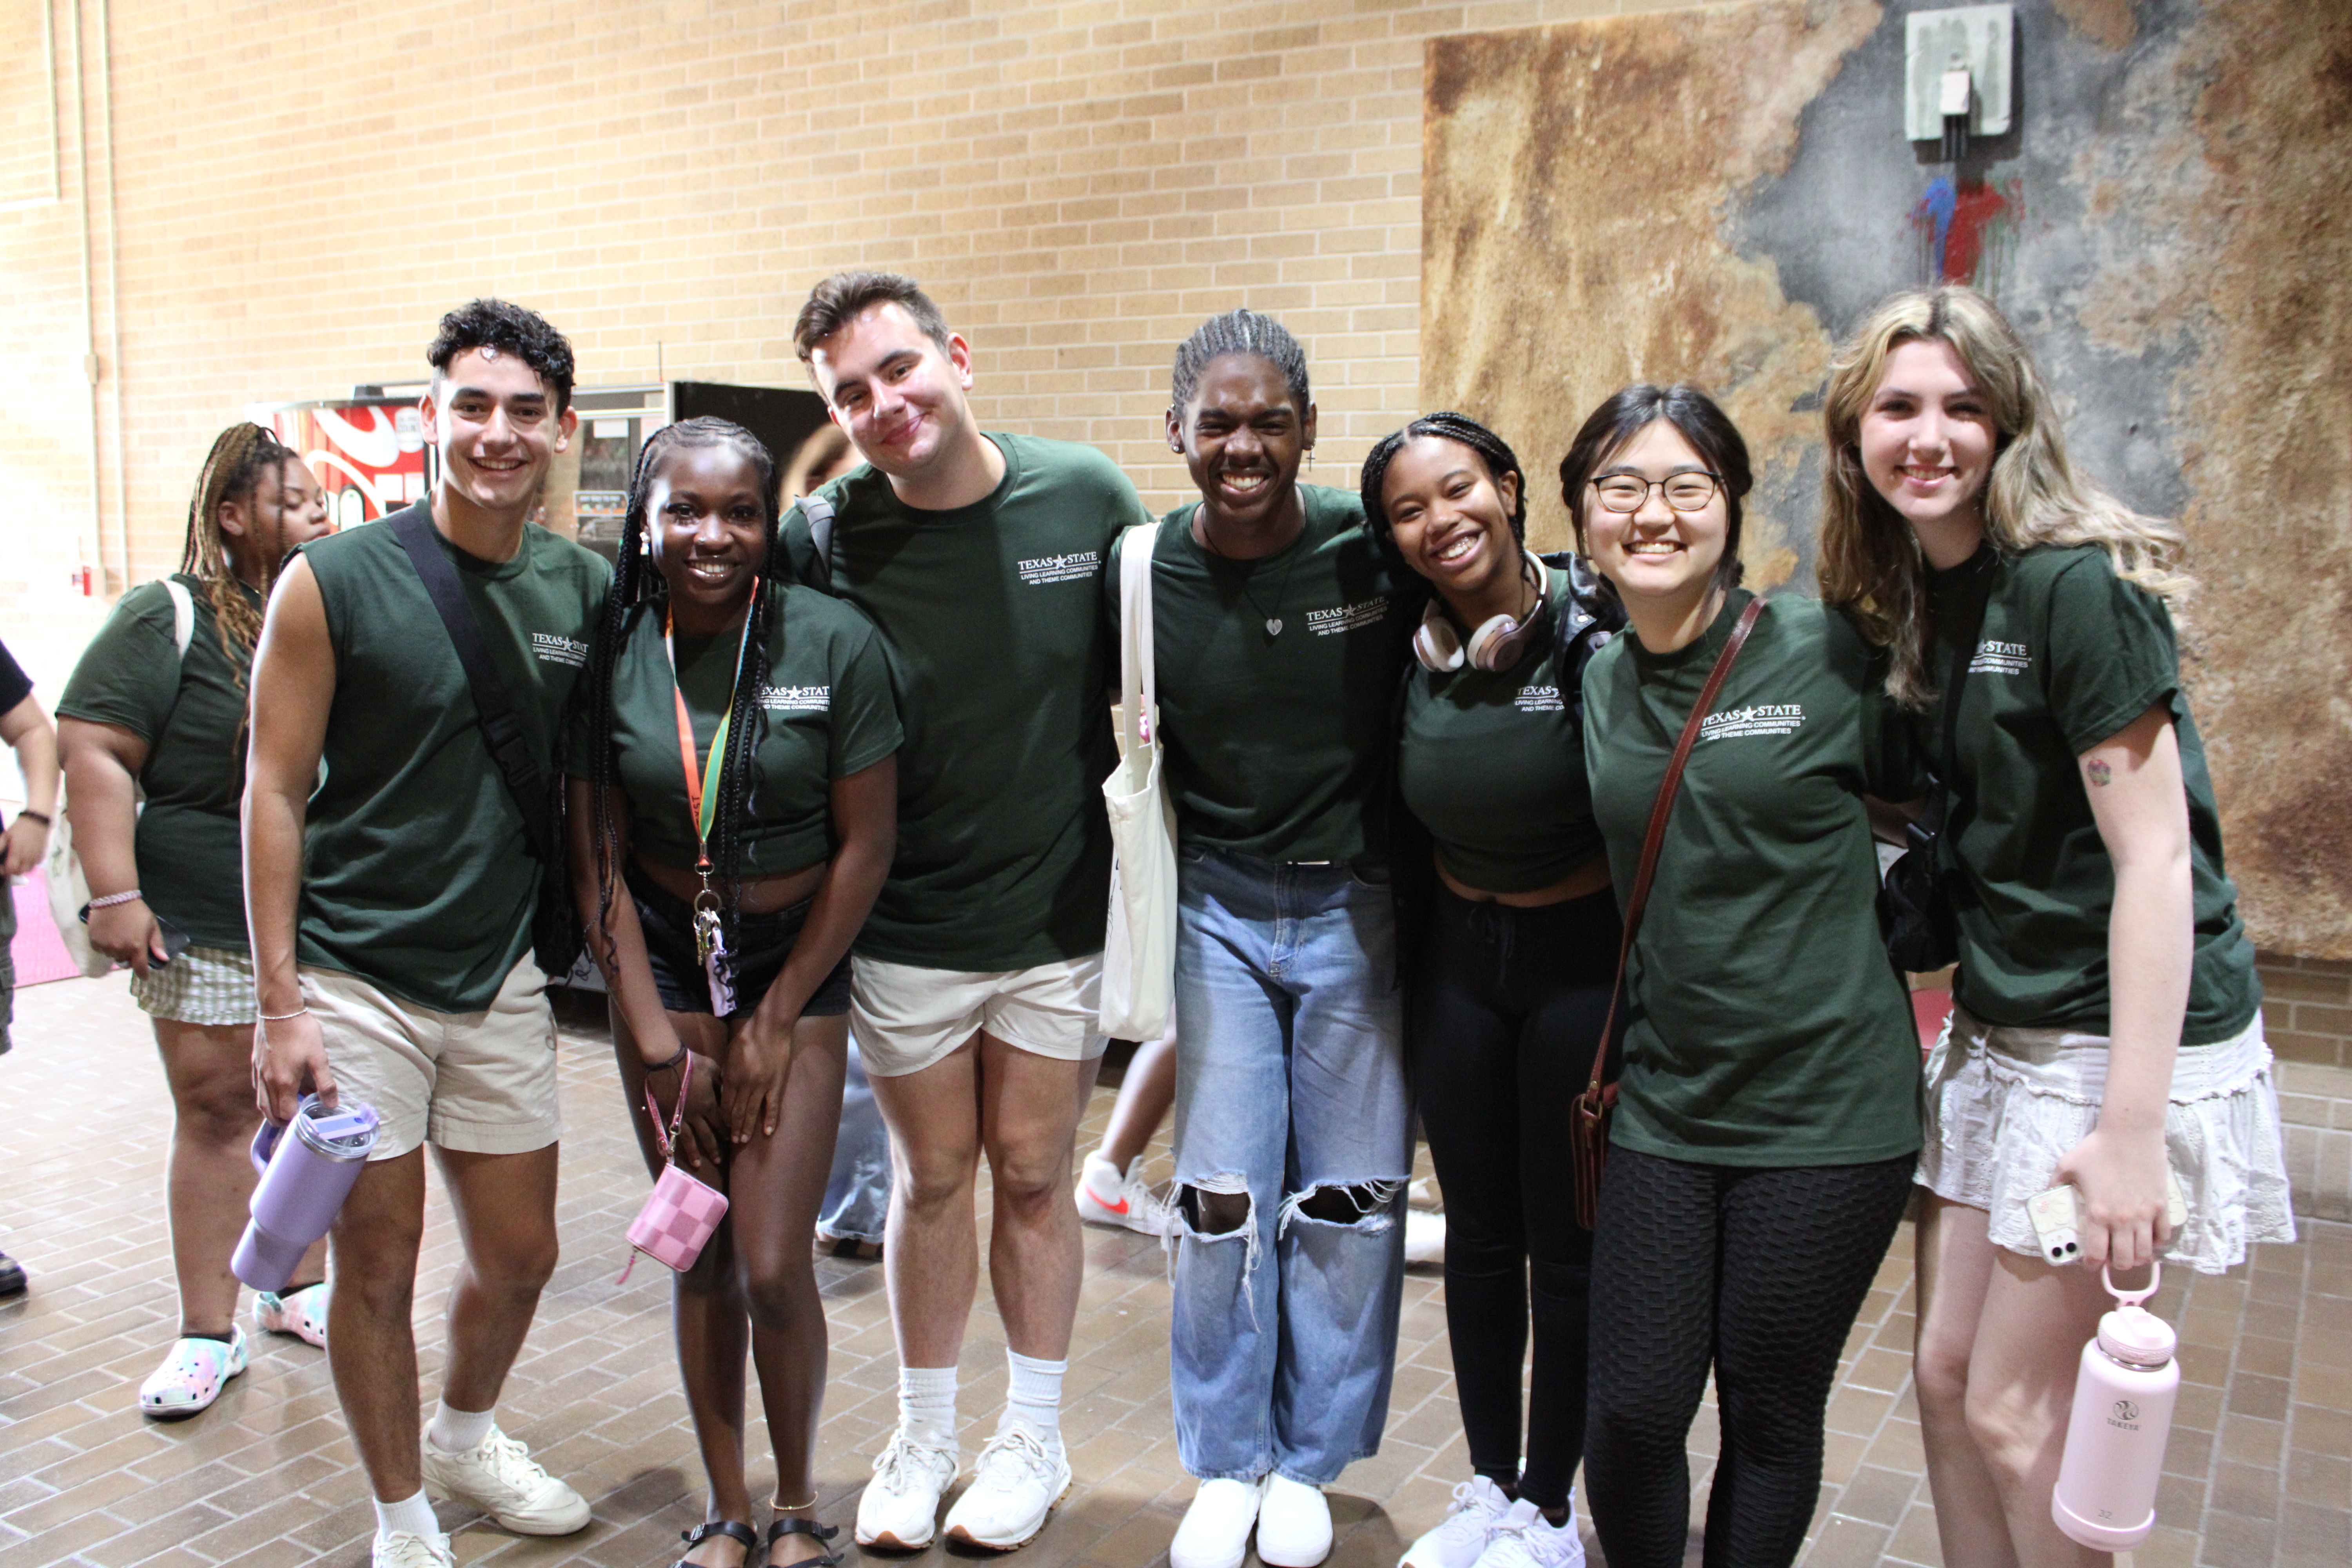 Group of students in matching green shirts